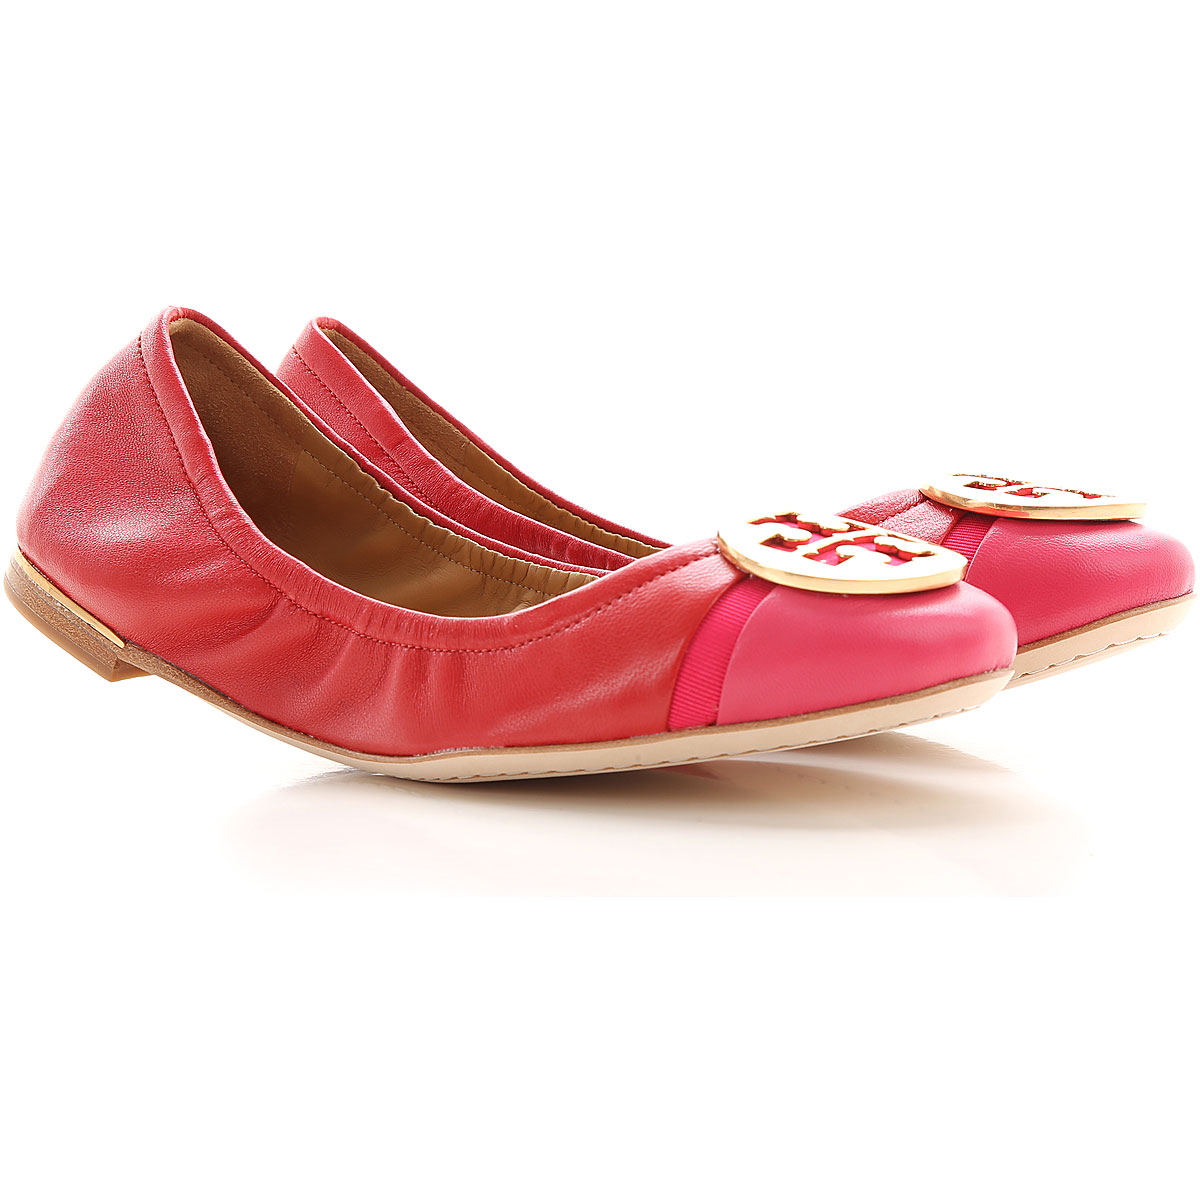 ballerina shoes for sale